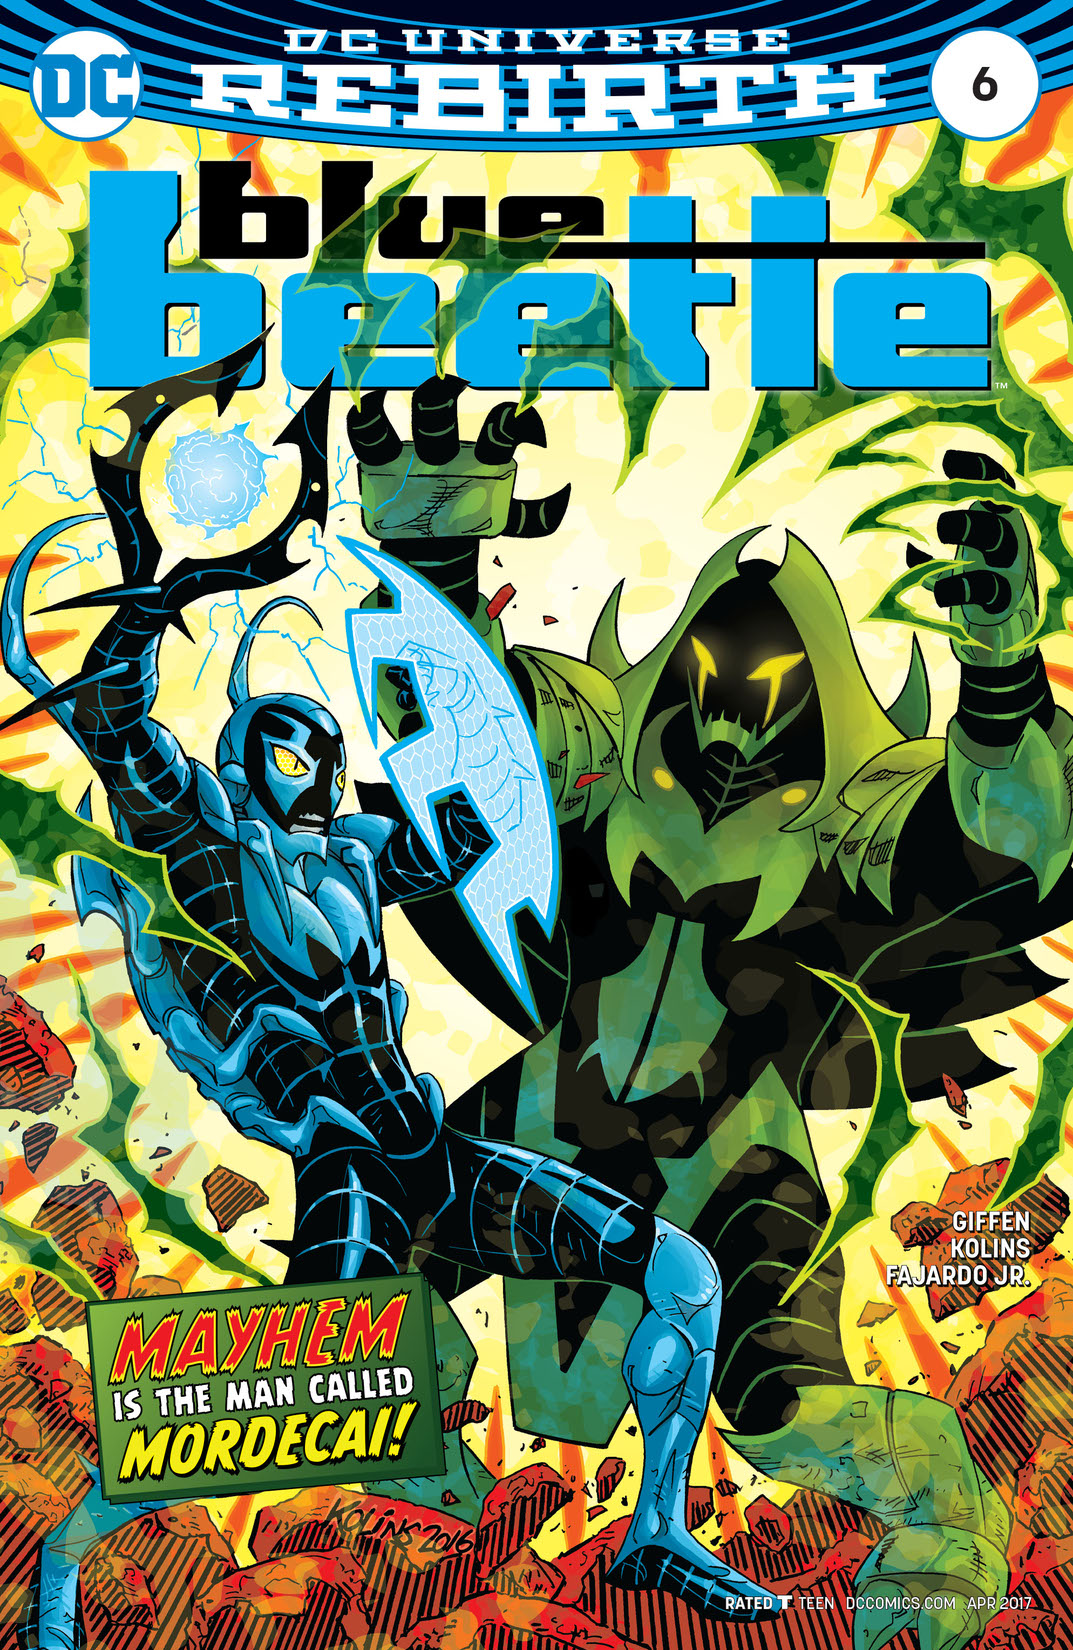 Blue Beetle (2016-) #6 preview images